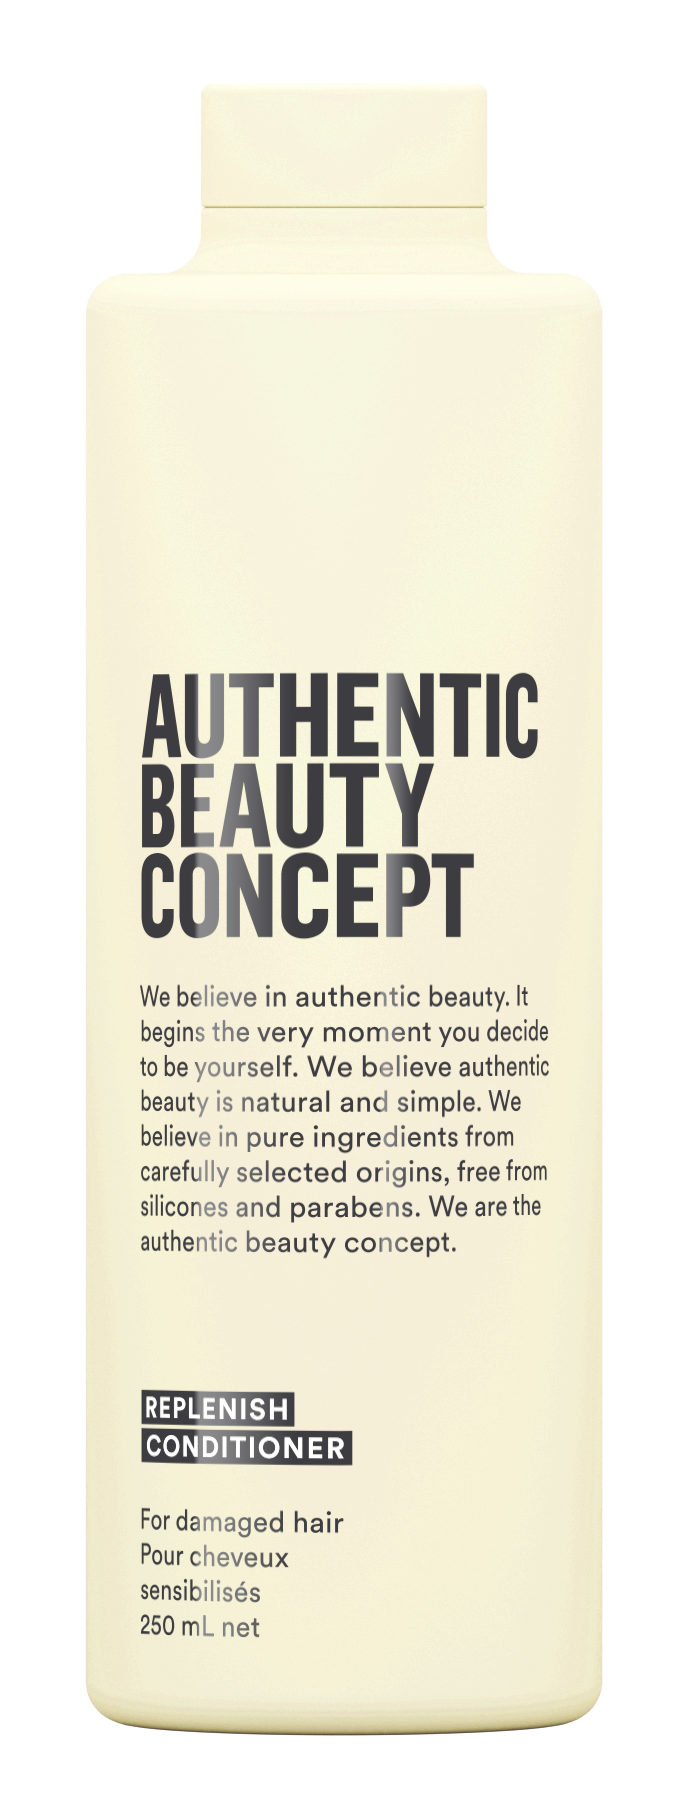 Eds Hair - Authentic Beauty Concept - Replenish Conditioner 250ml